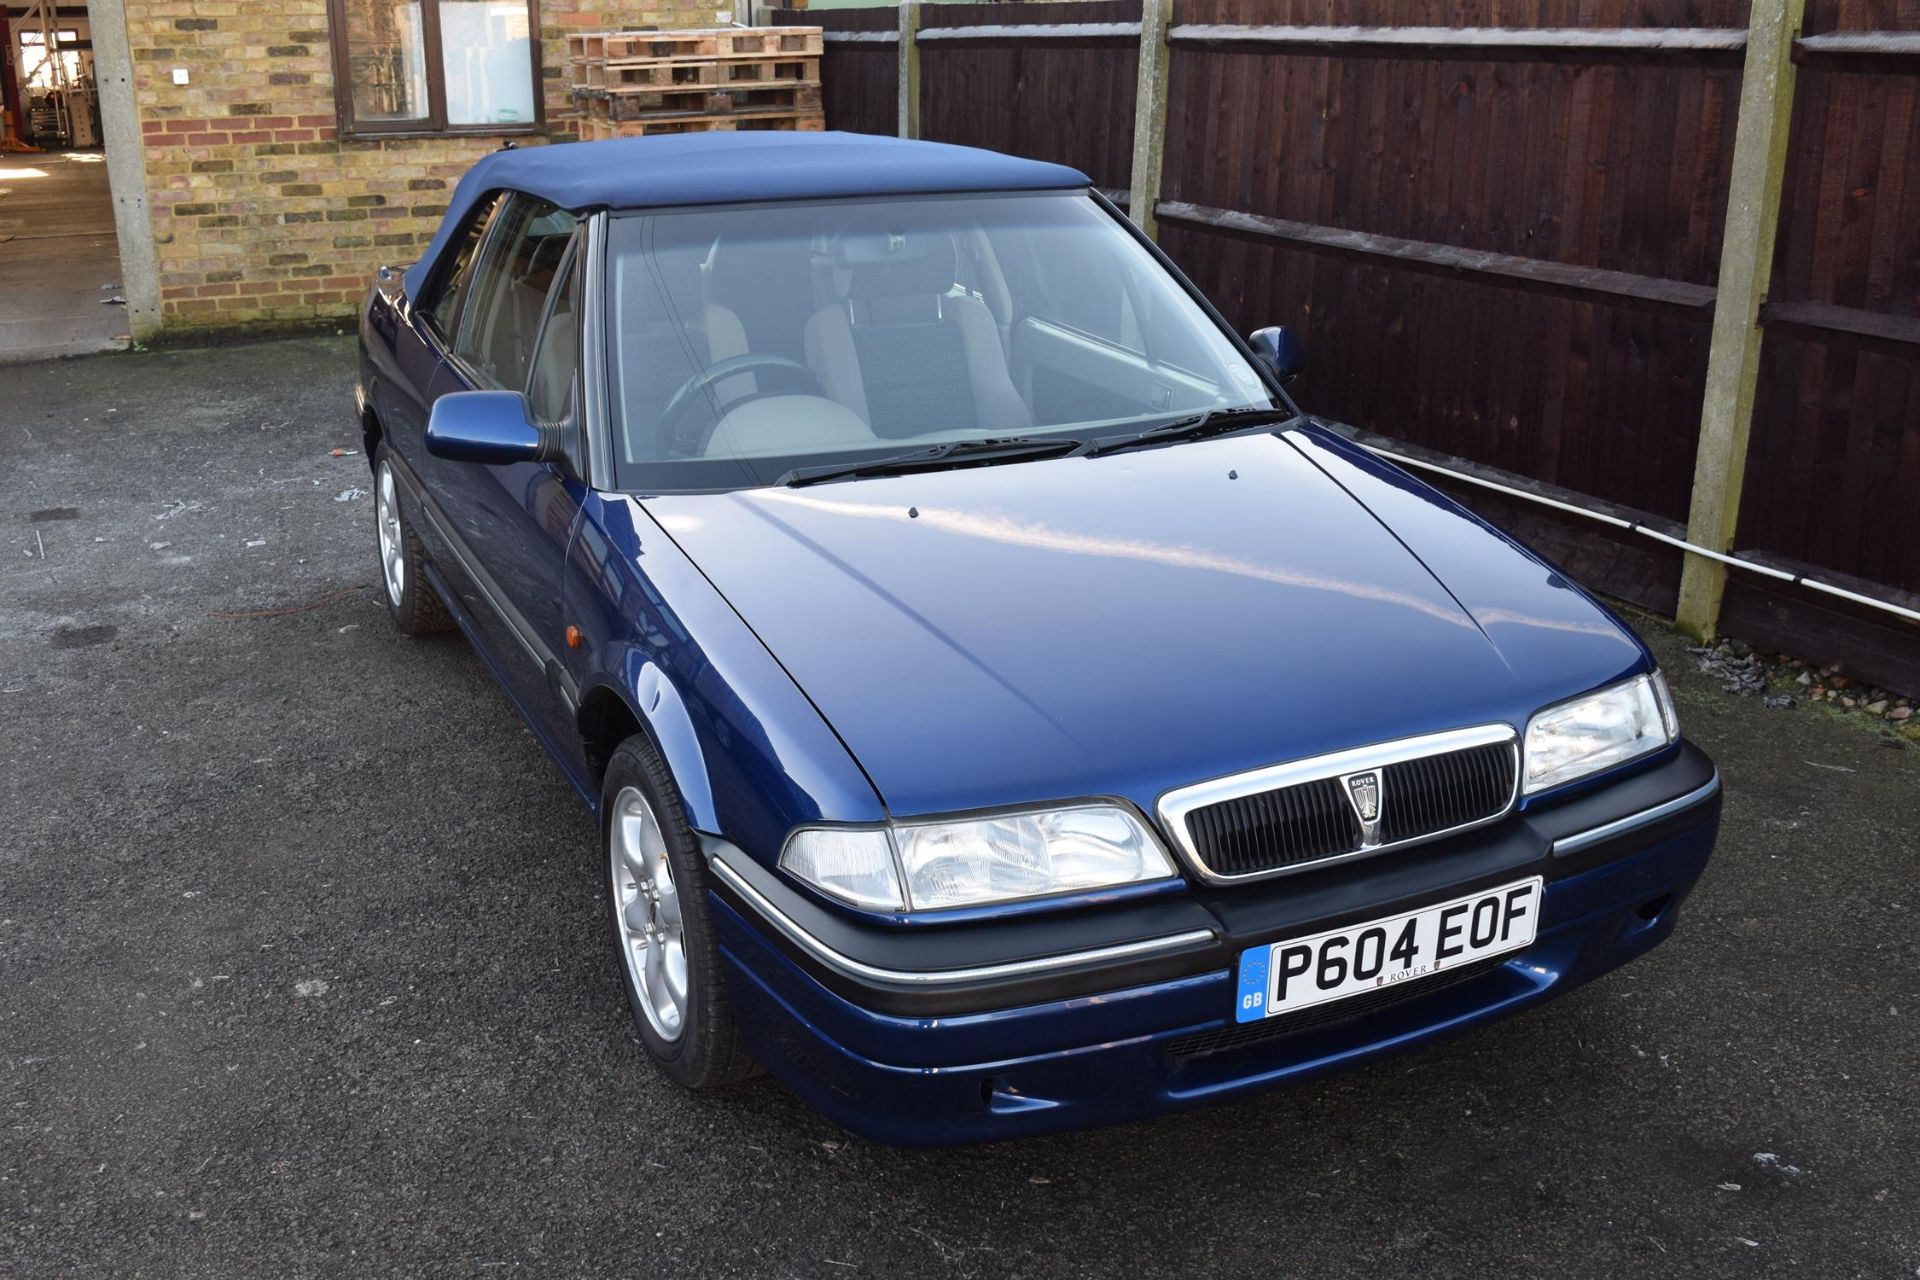 1996 Rover 216 Cabriolet - Image 3 of 25